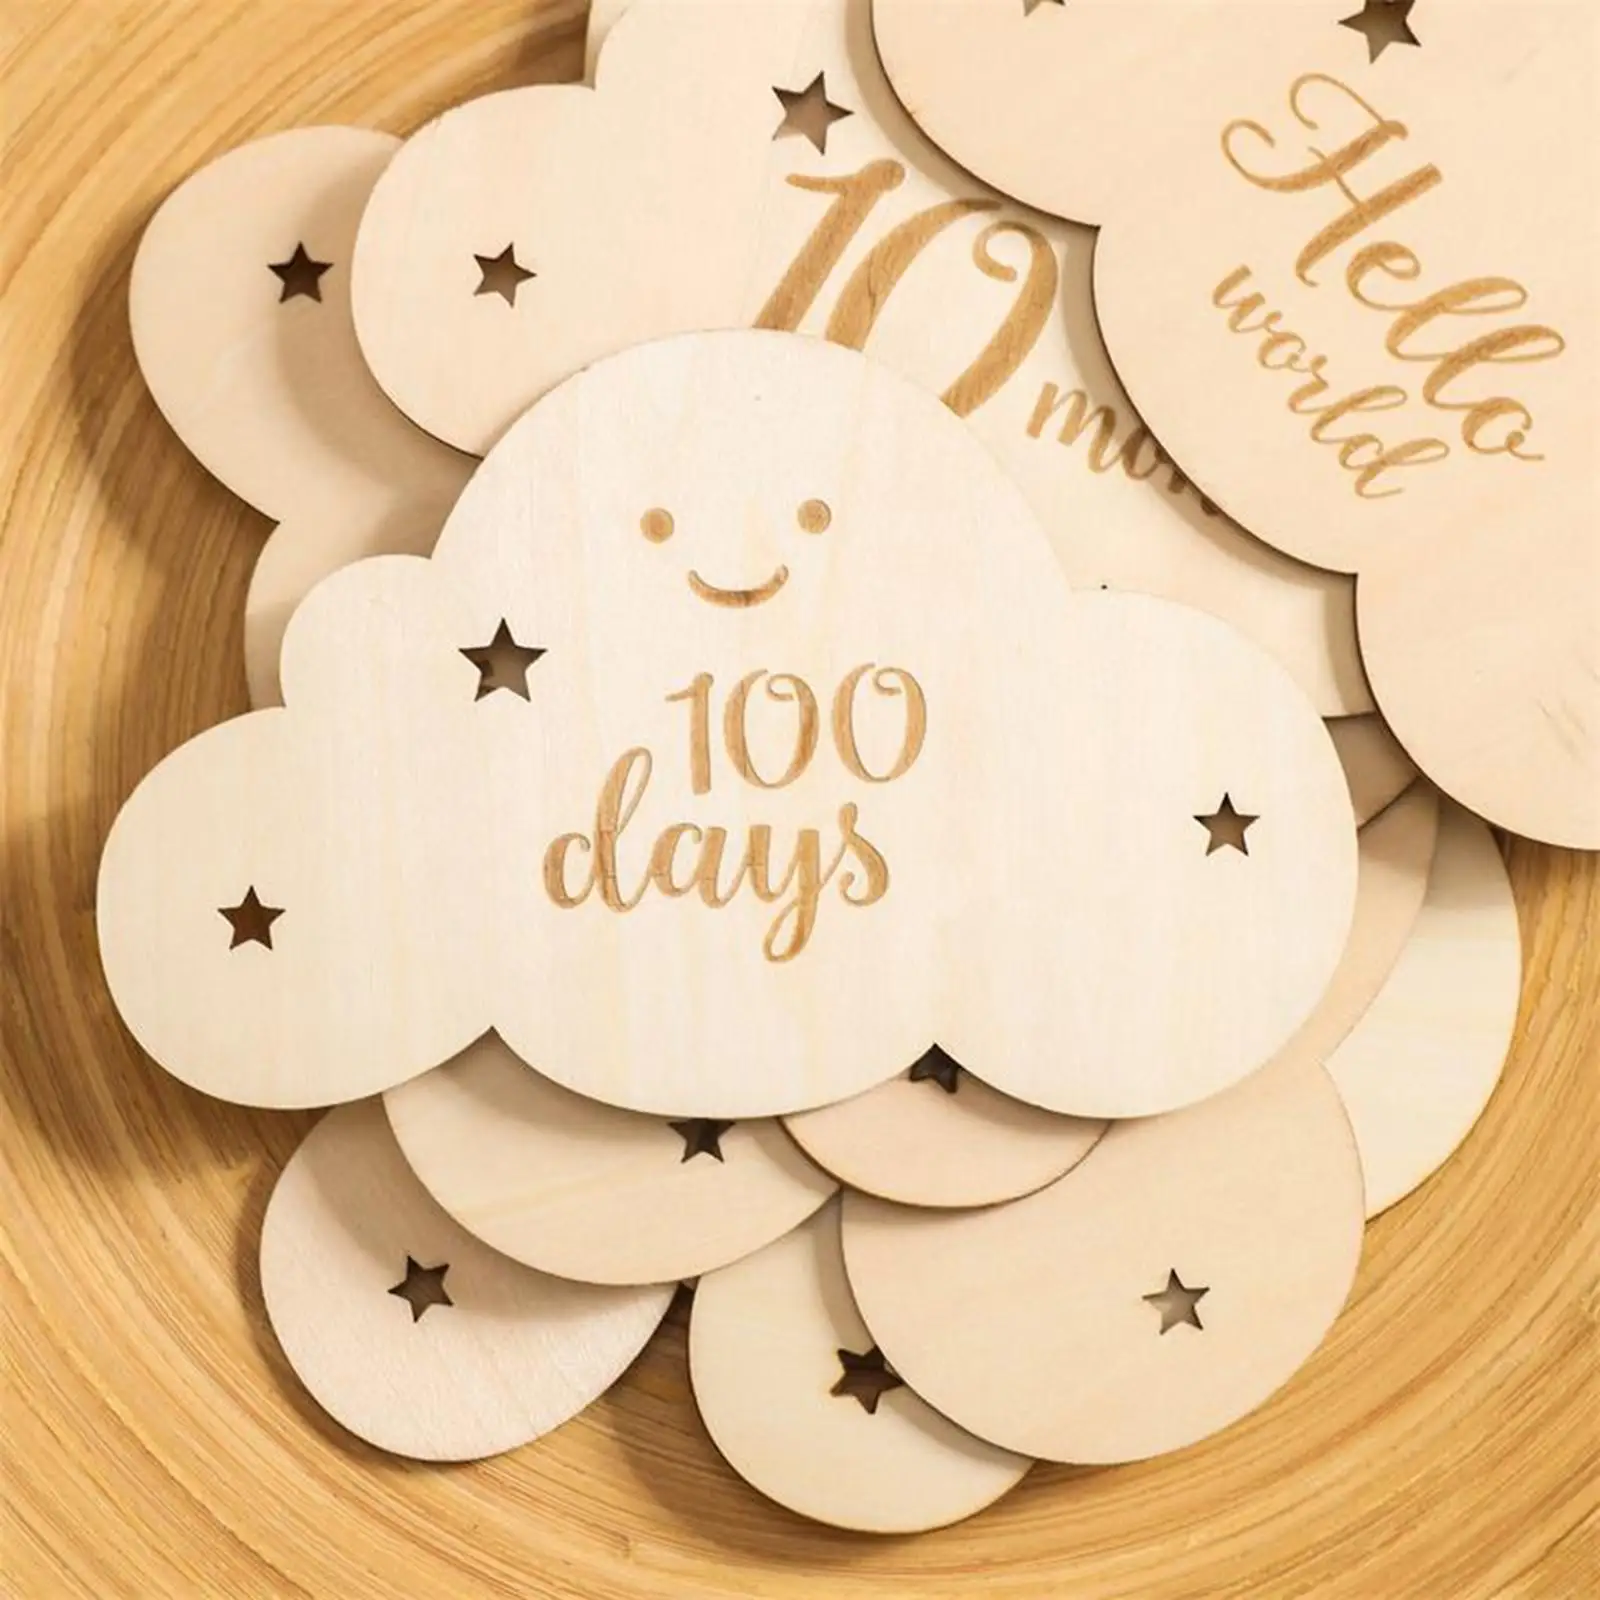 8 Pieces Wooden Baby Milestone Cards Record Growth New Mom Gifts Keepsake Toy Cute Clouds Shape Birth Journey Milestone Markers